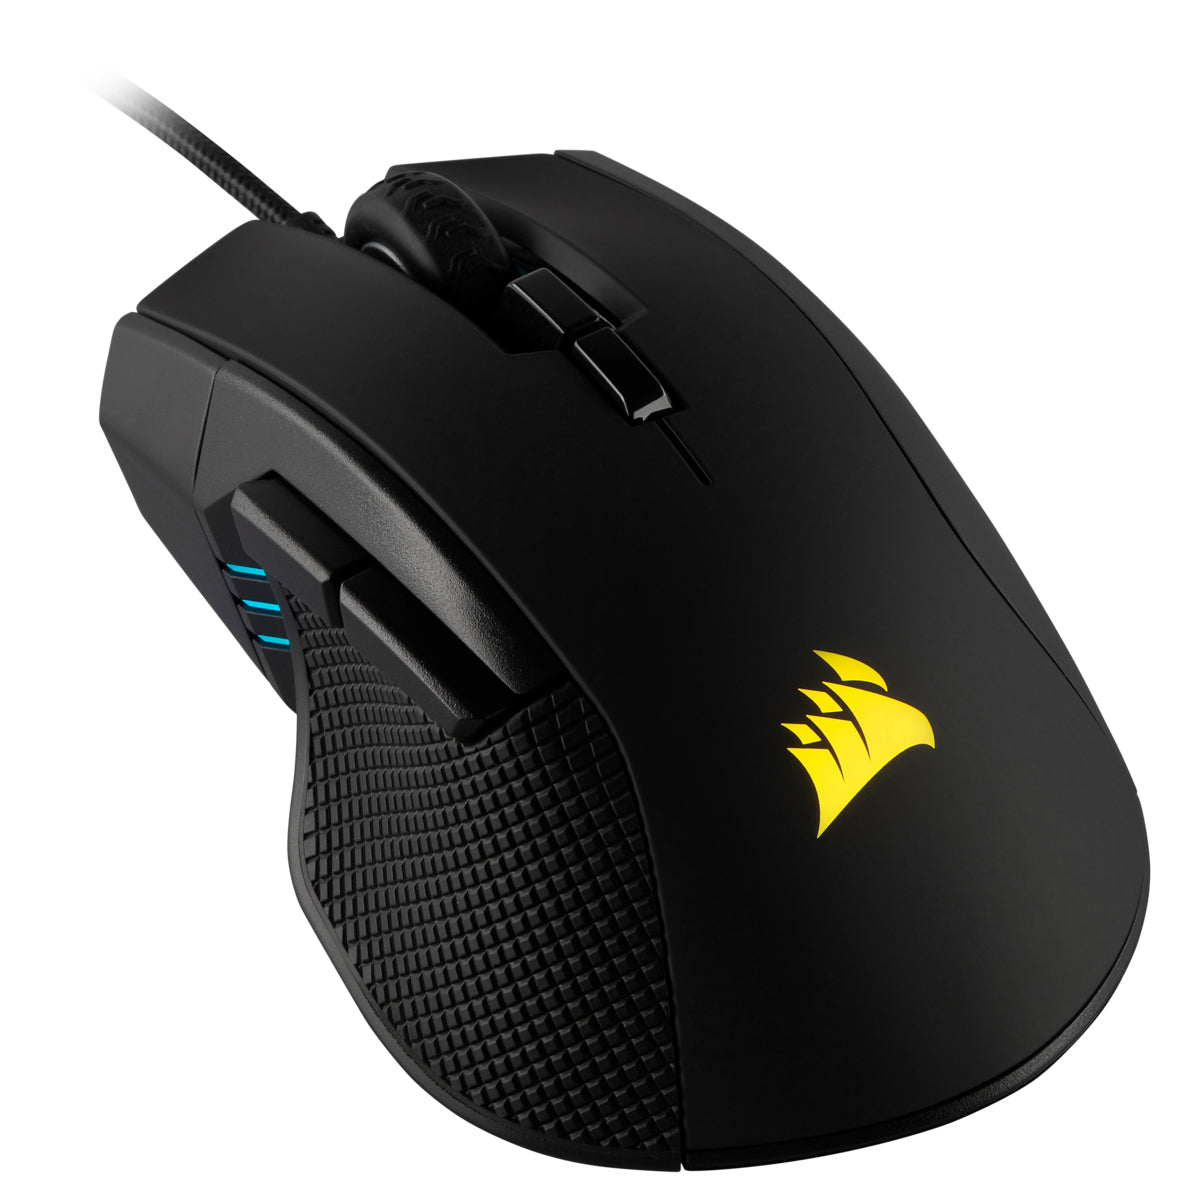 Corsair Ironclaw Rgb Mouse Right-Hand USB Type-A 18000 DPI-(CH-9307011-EU)